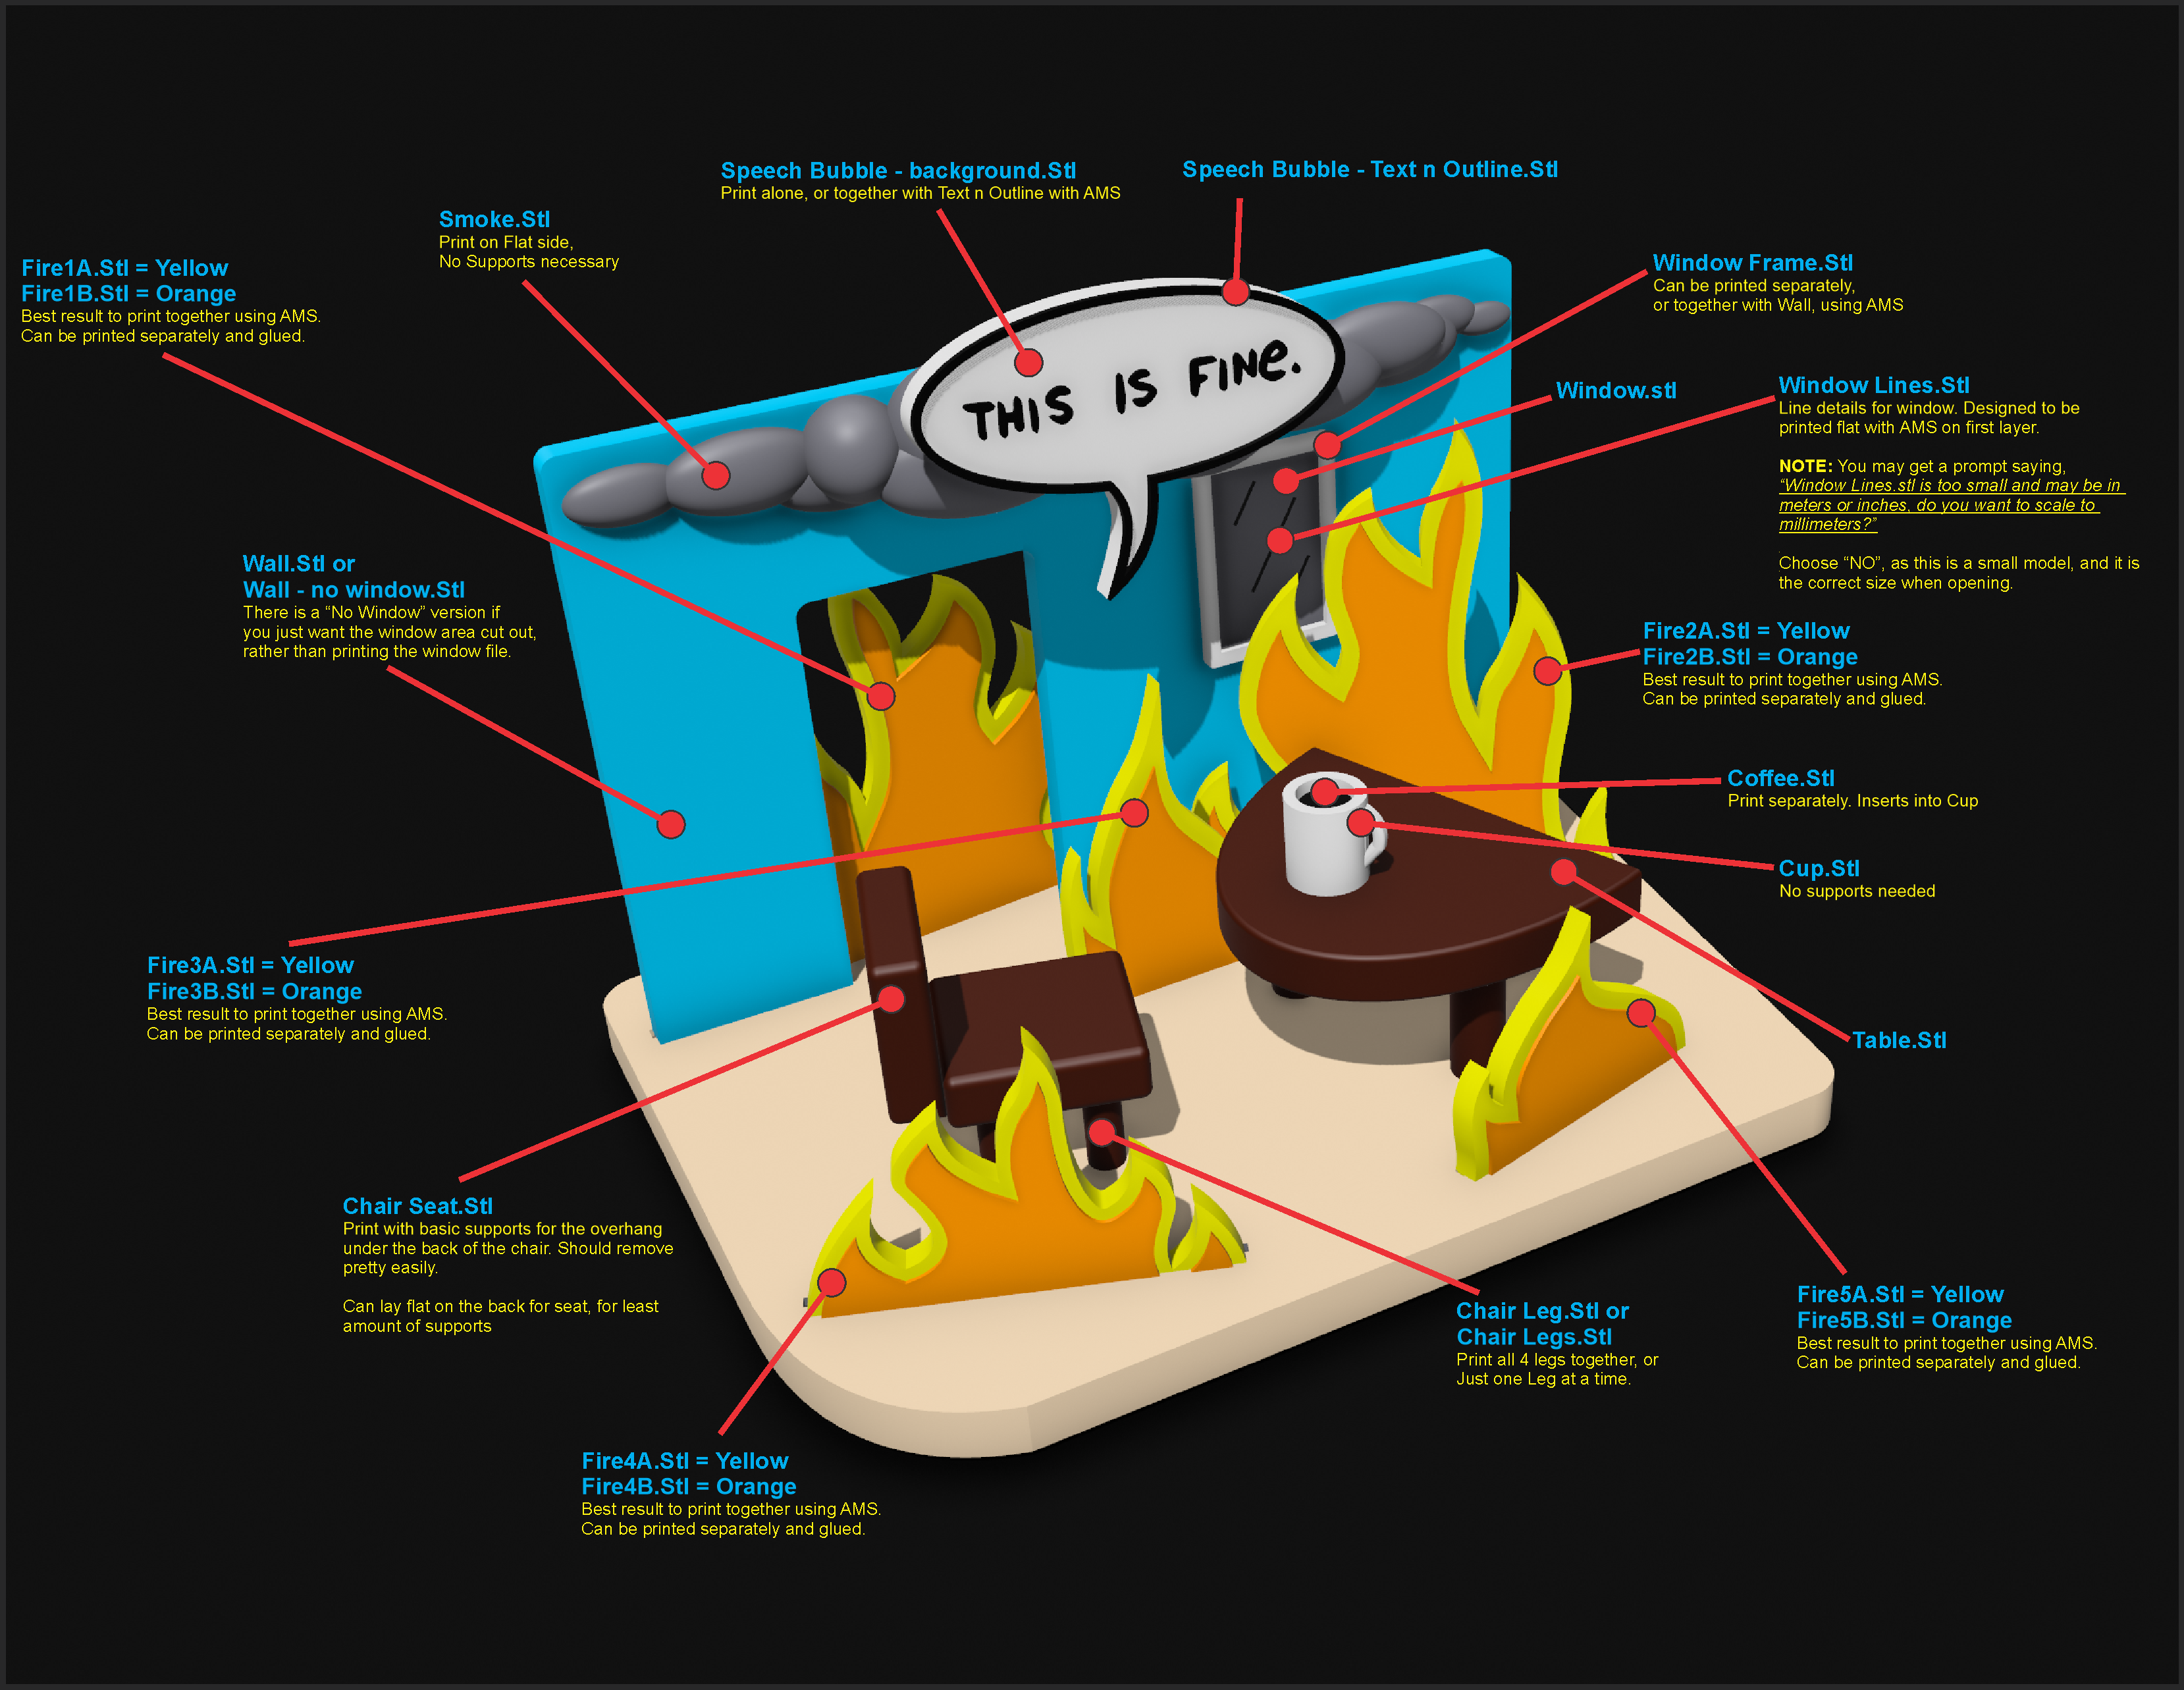 This is Fine Dog Remix, Remix by Foppemoa, Download free STL model